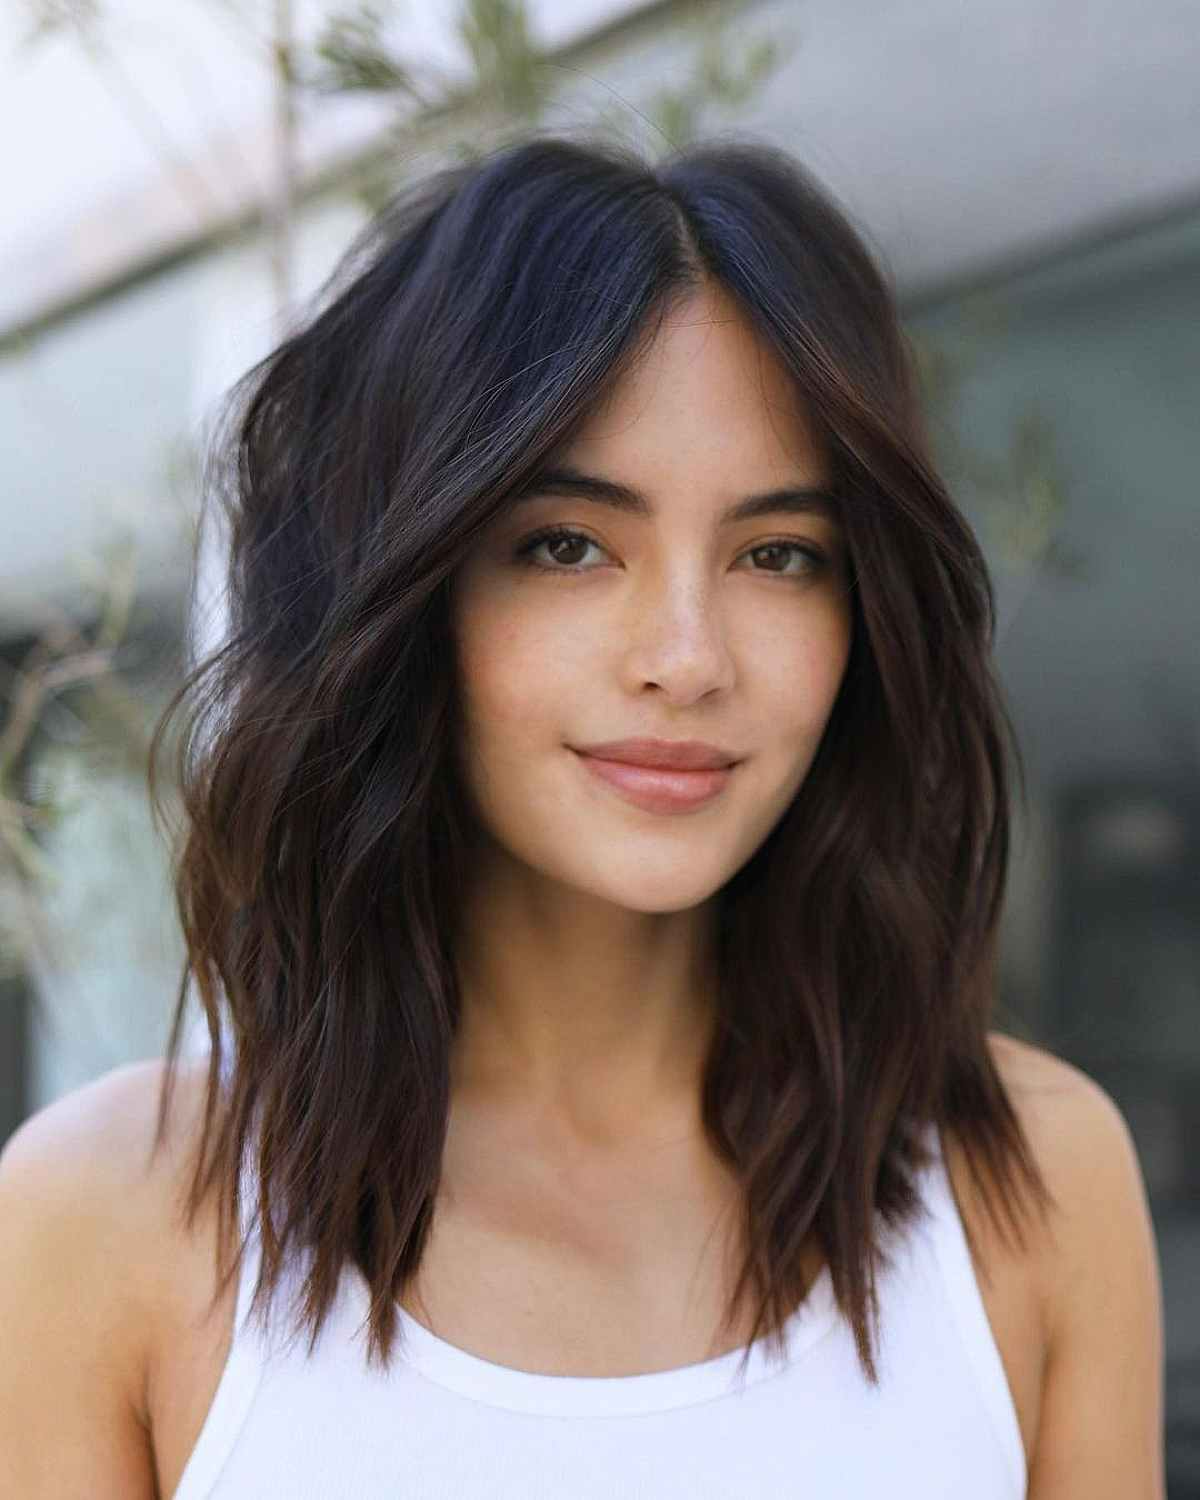 How to Choose the Best Medium Length
Haircut for Your Face Shape